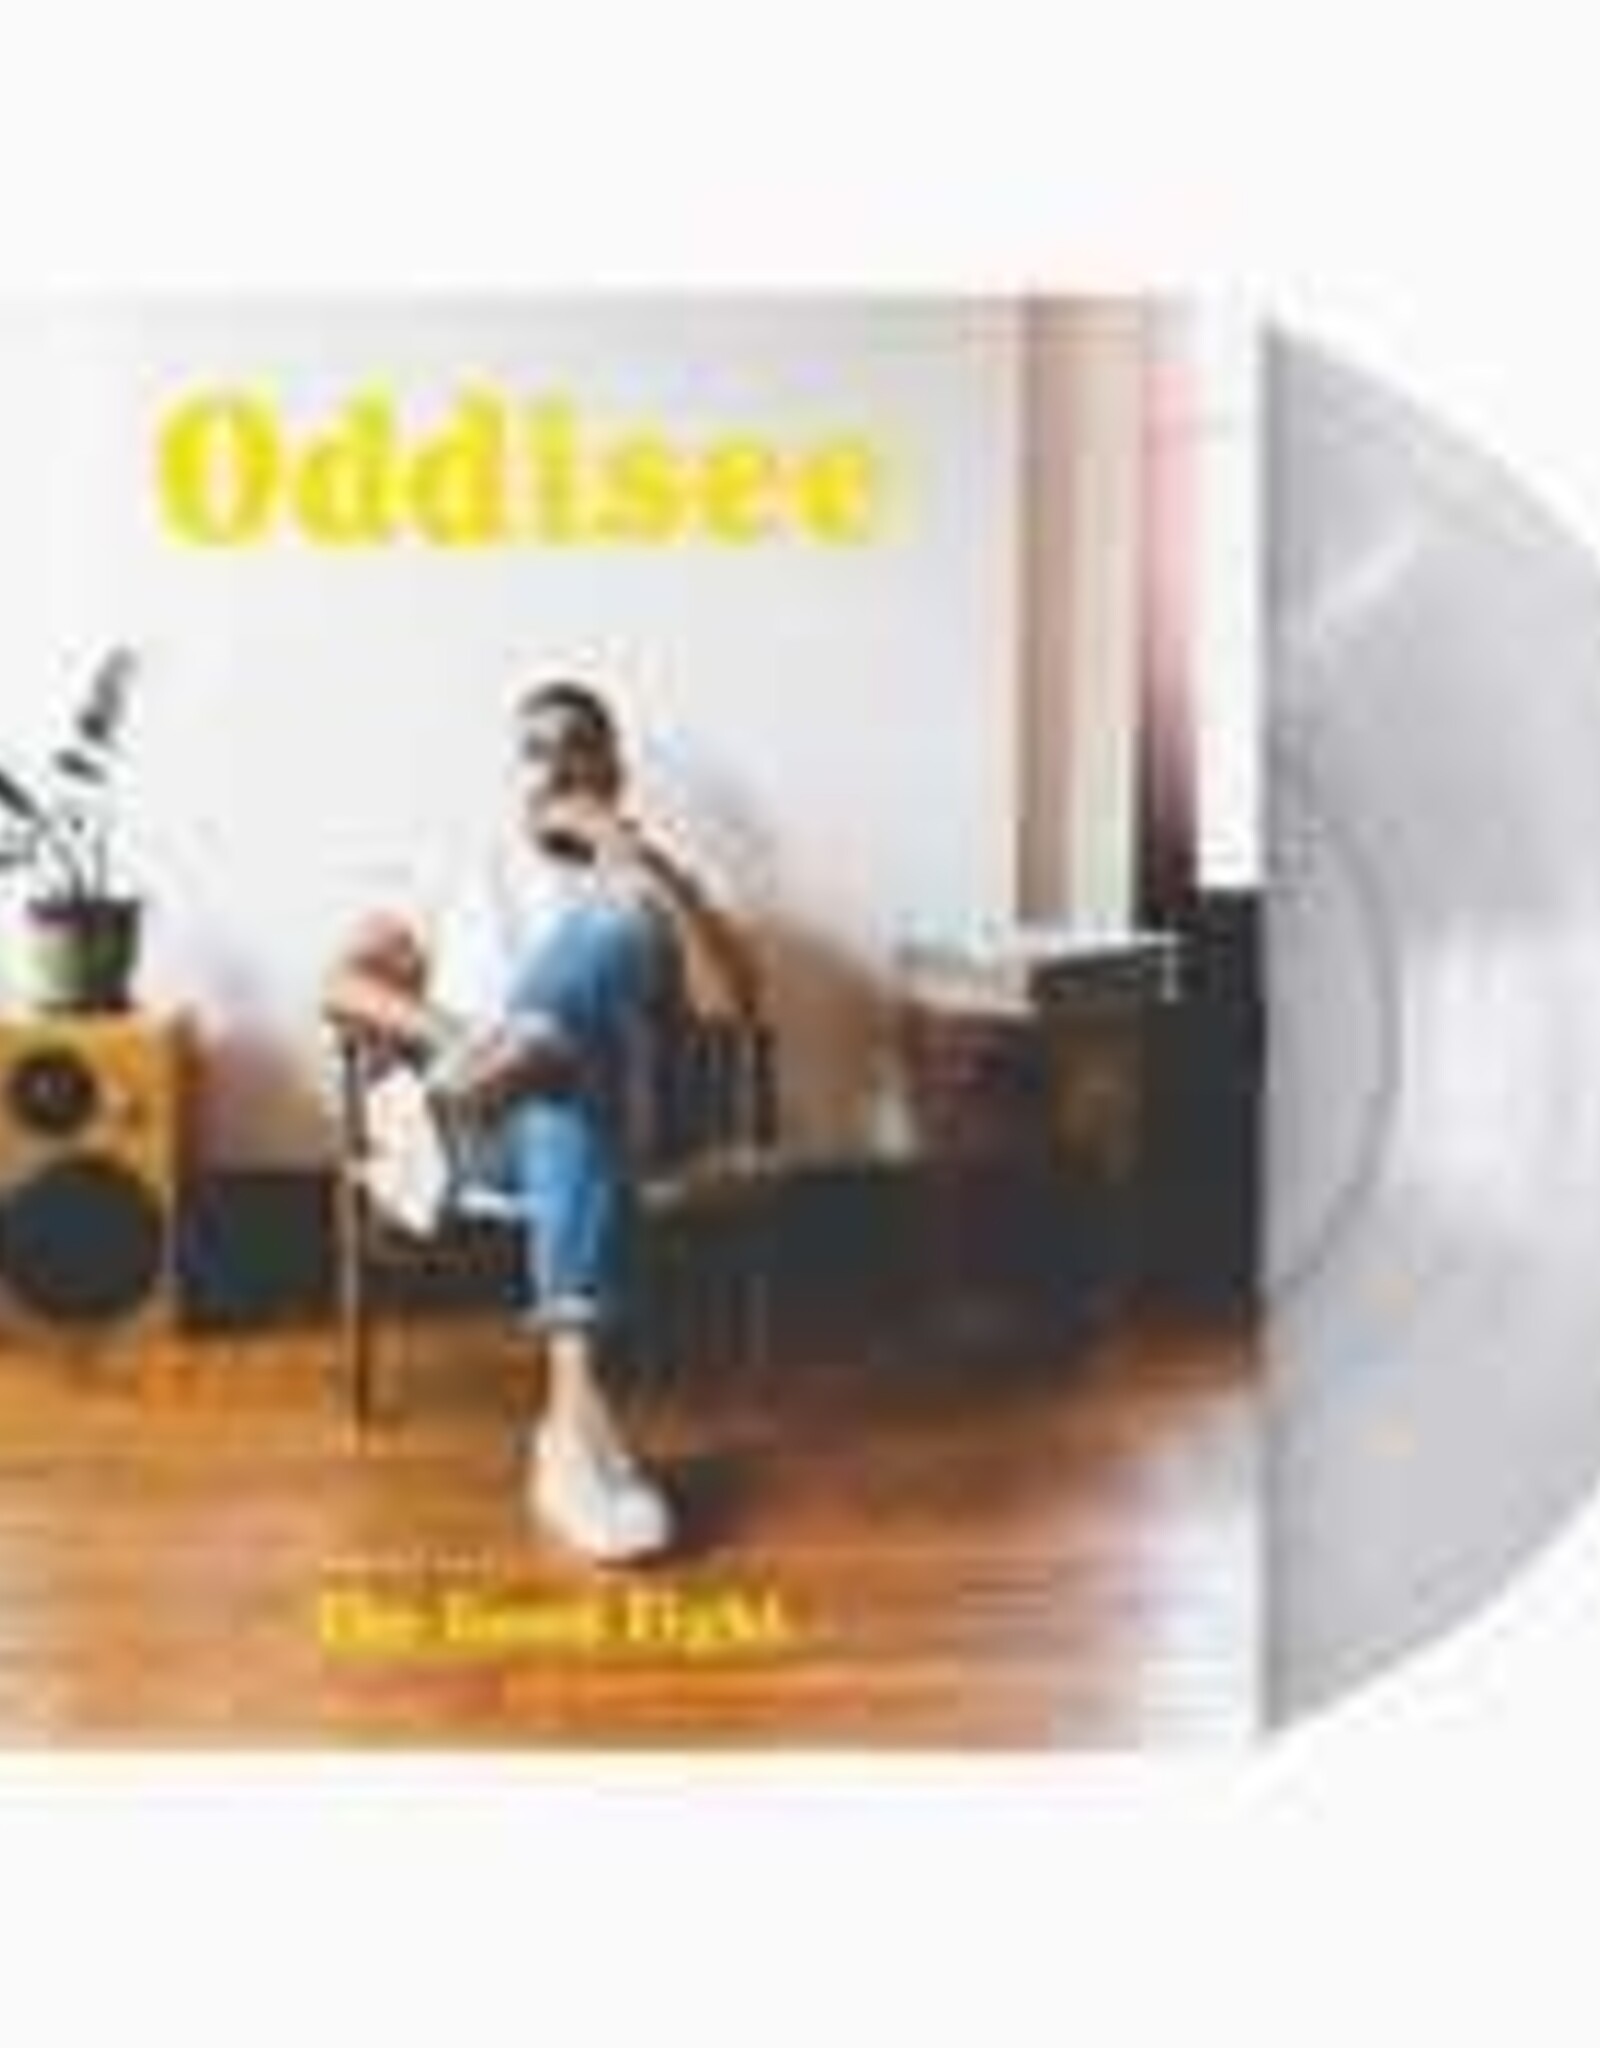 Oddisee - The Good Fight (ULTRA CLEAR VINYL)